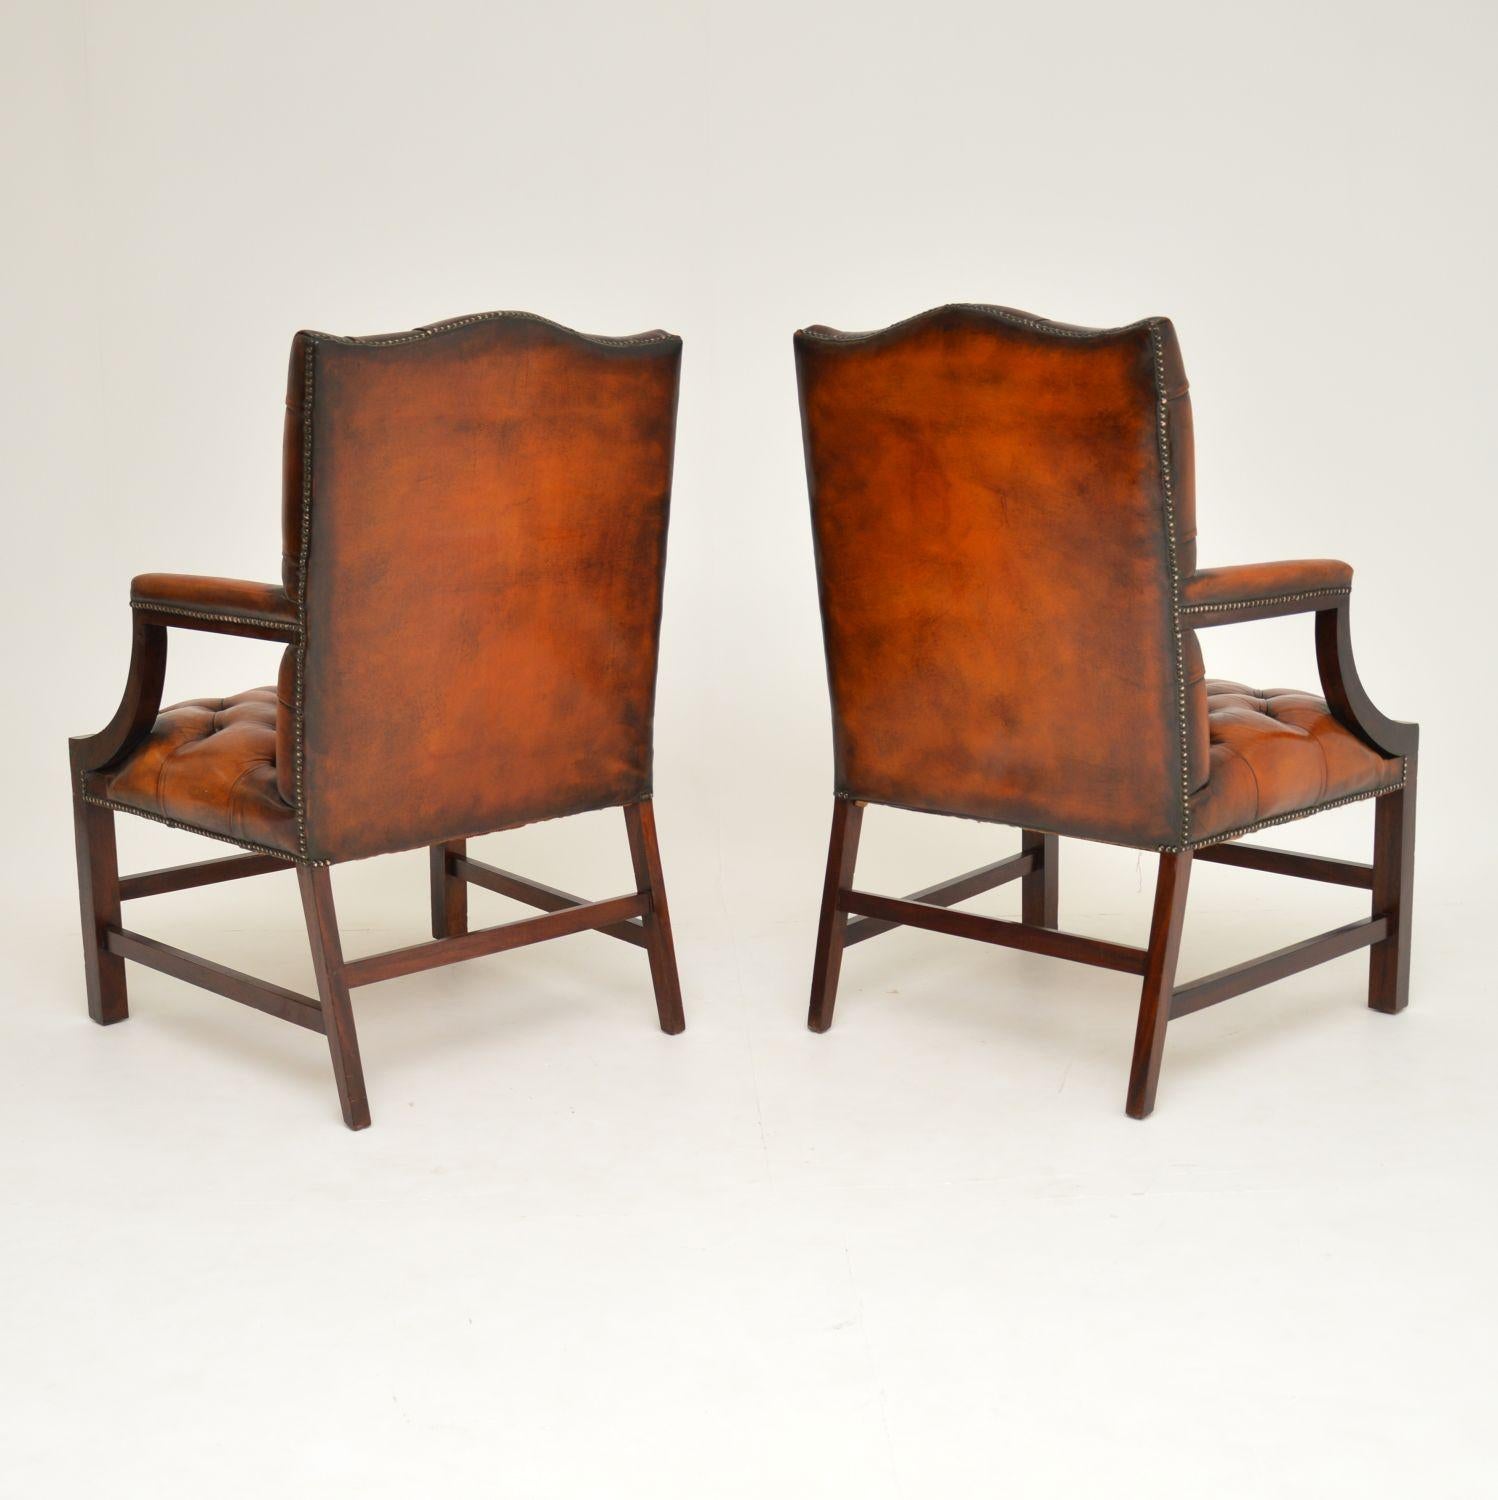 Pair of Antique Leather and Mahogany Gainsborough Armchairs 1